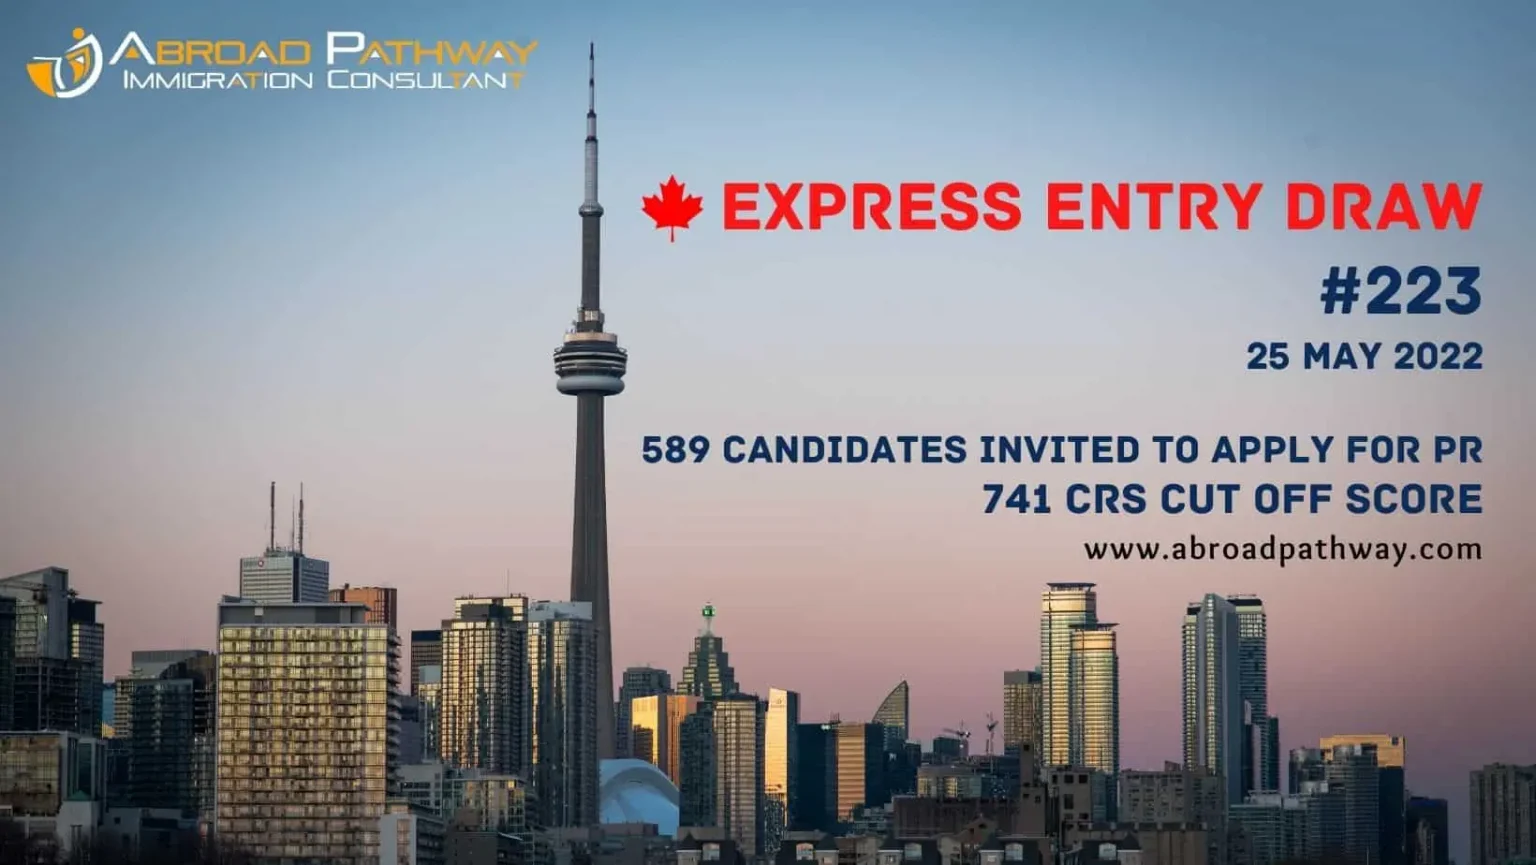 Express Entry Draw- Invites 589 PNP candidates